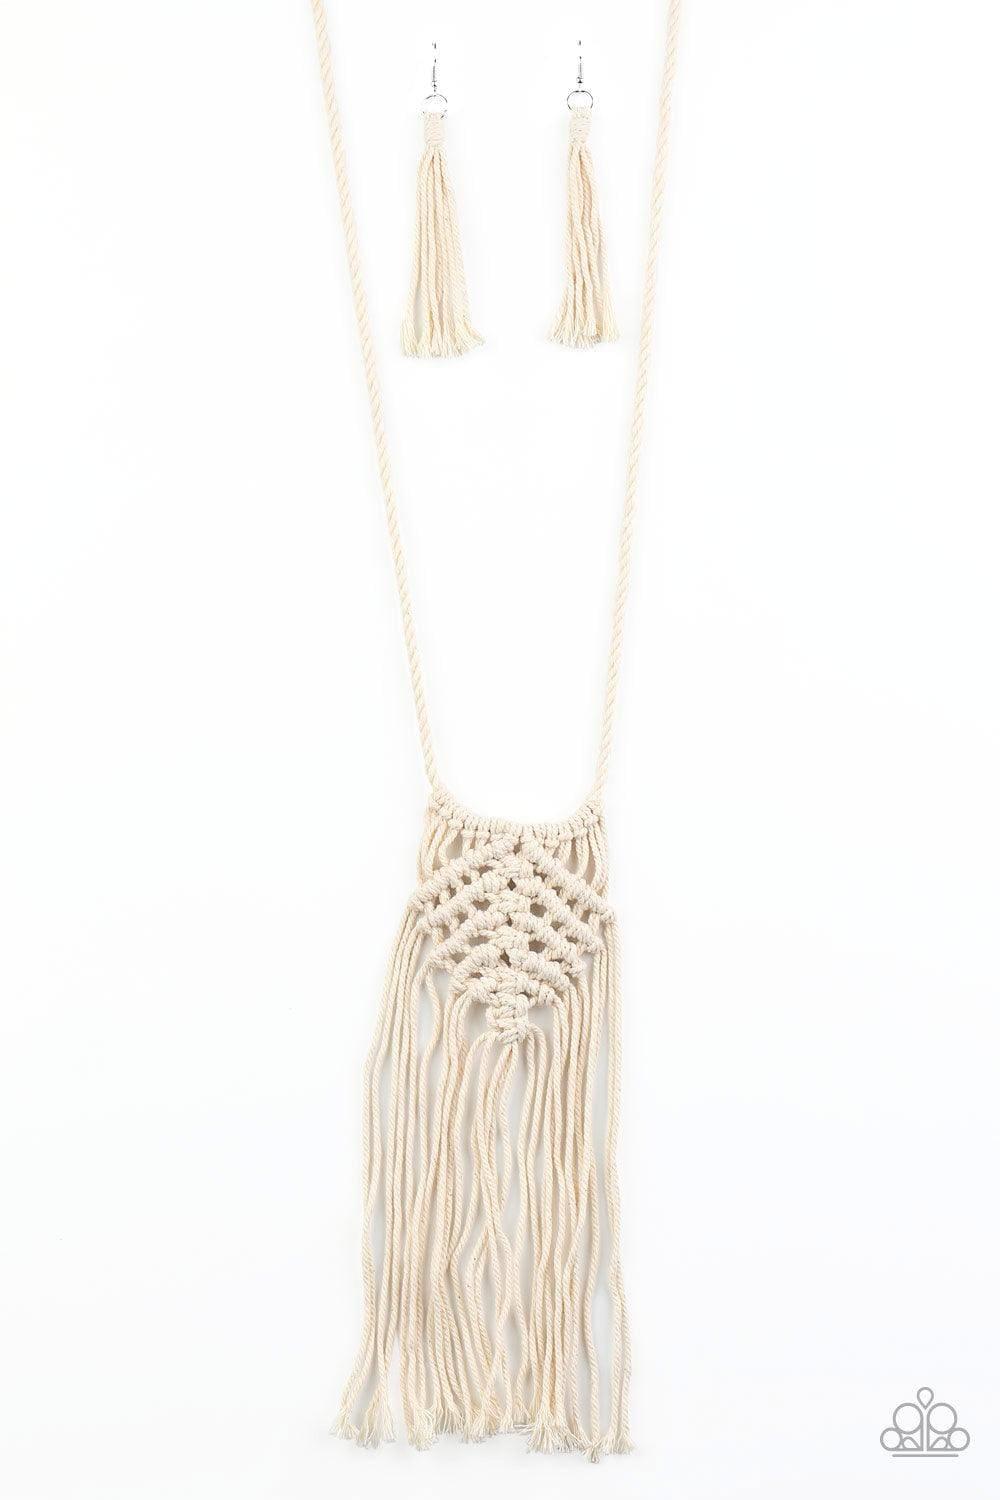 Paparazzi Accessories - Macrame Mantra - White Necklace - Bling by JessieK